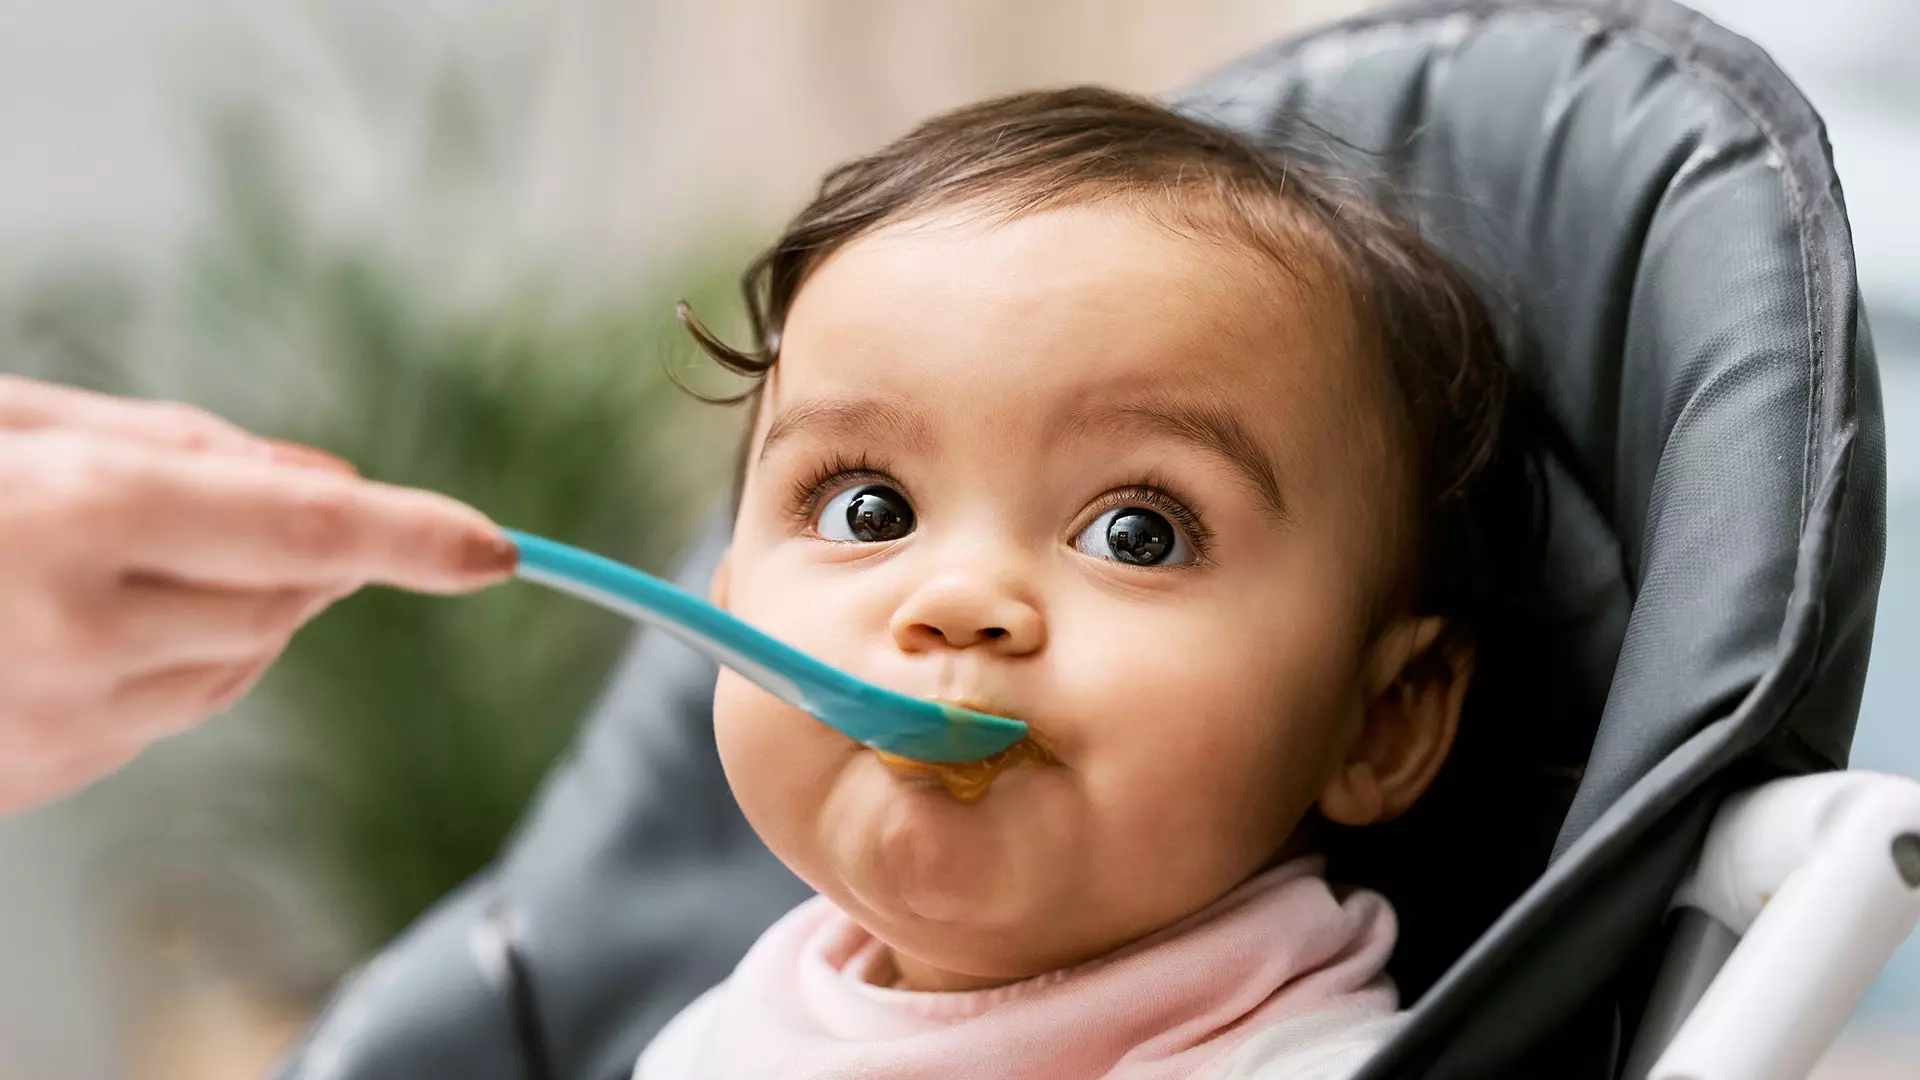 Cerelac controversy: How harmful is added sugar in baby foods for children?